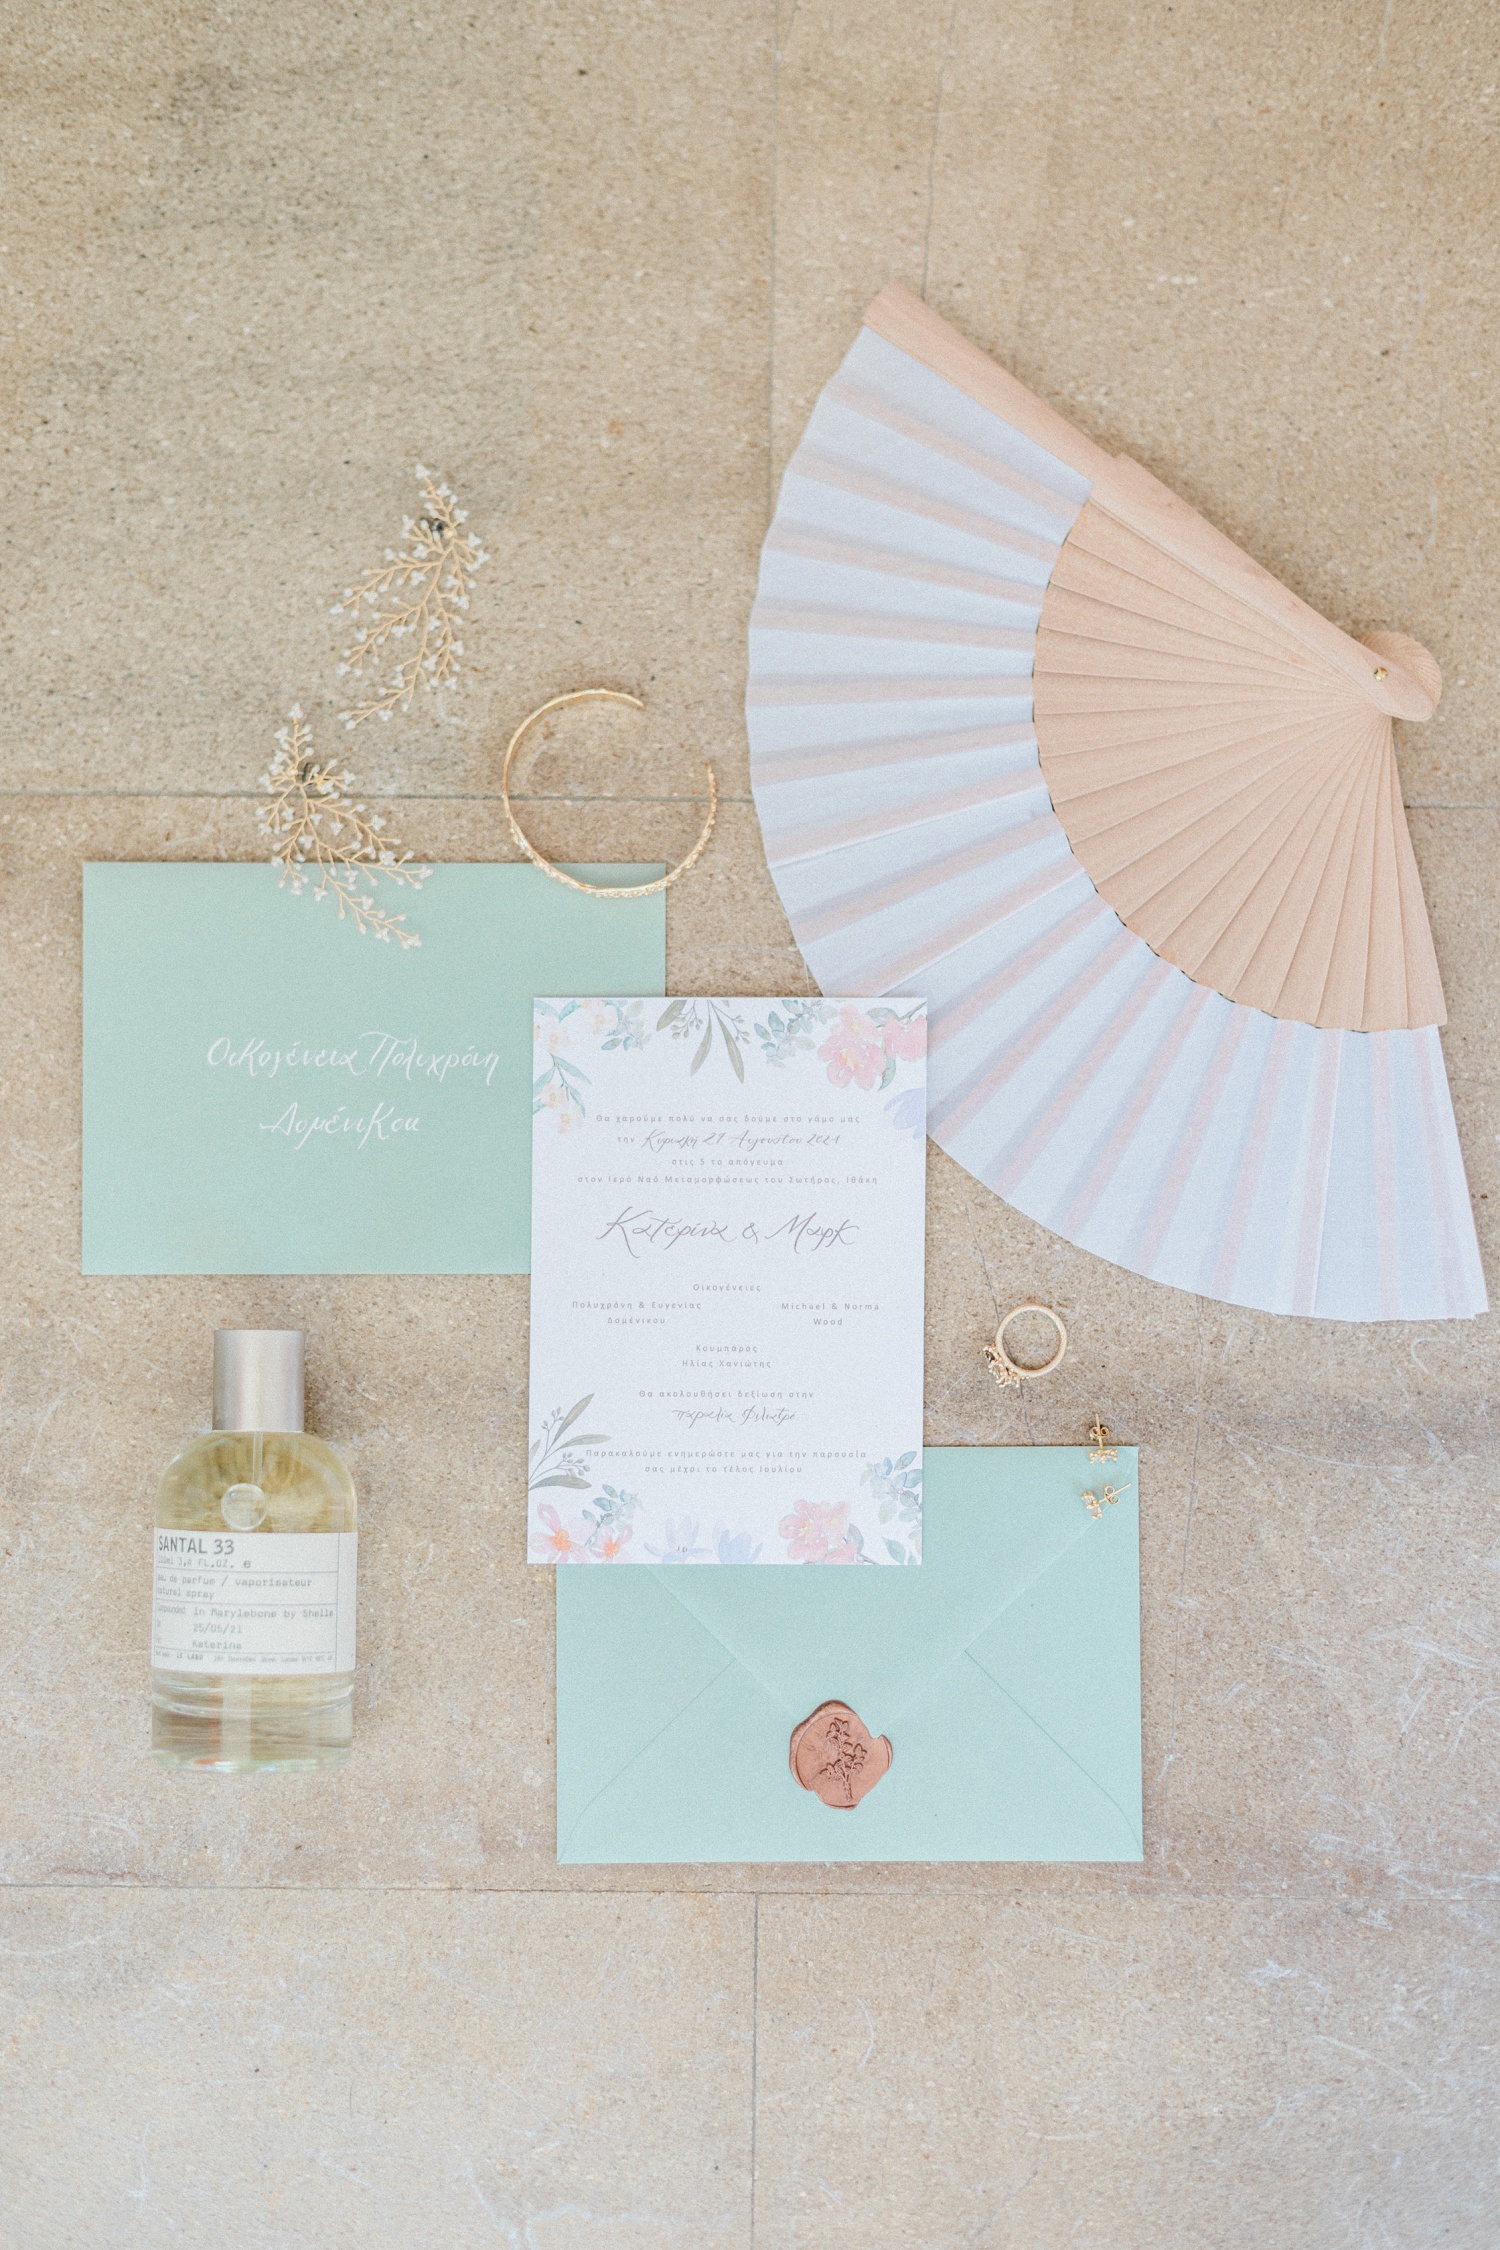 Bridal details including pastel wedding stationery by Chiaramada Studio, Ruth Tomlinson engagement ring and Le Labo fragrance